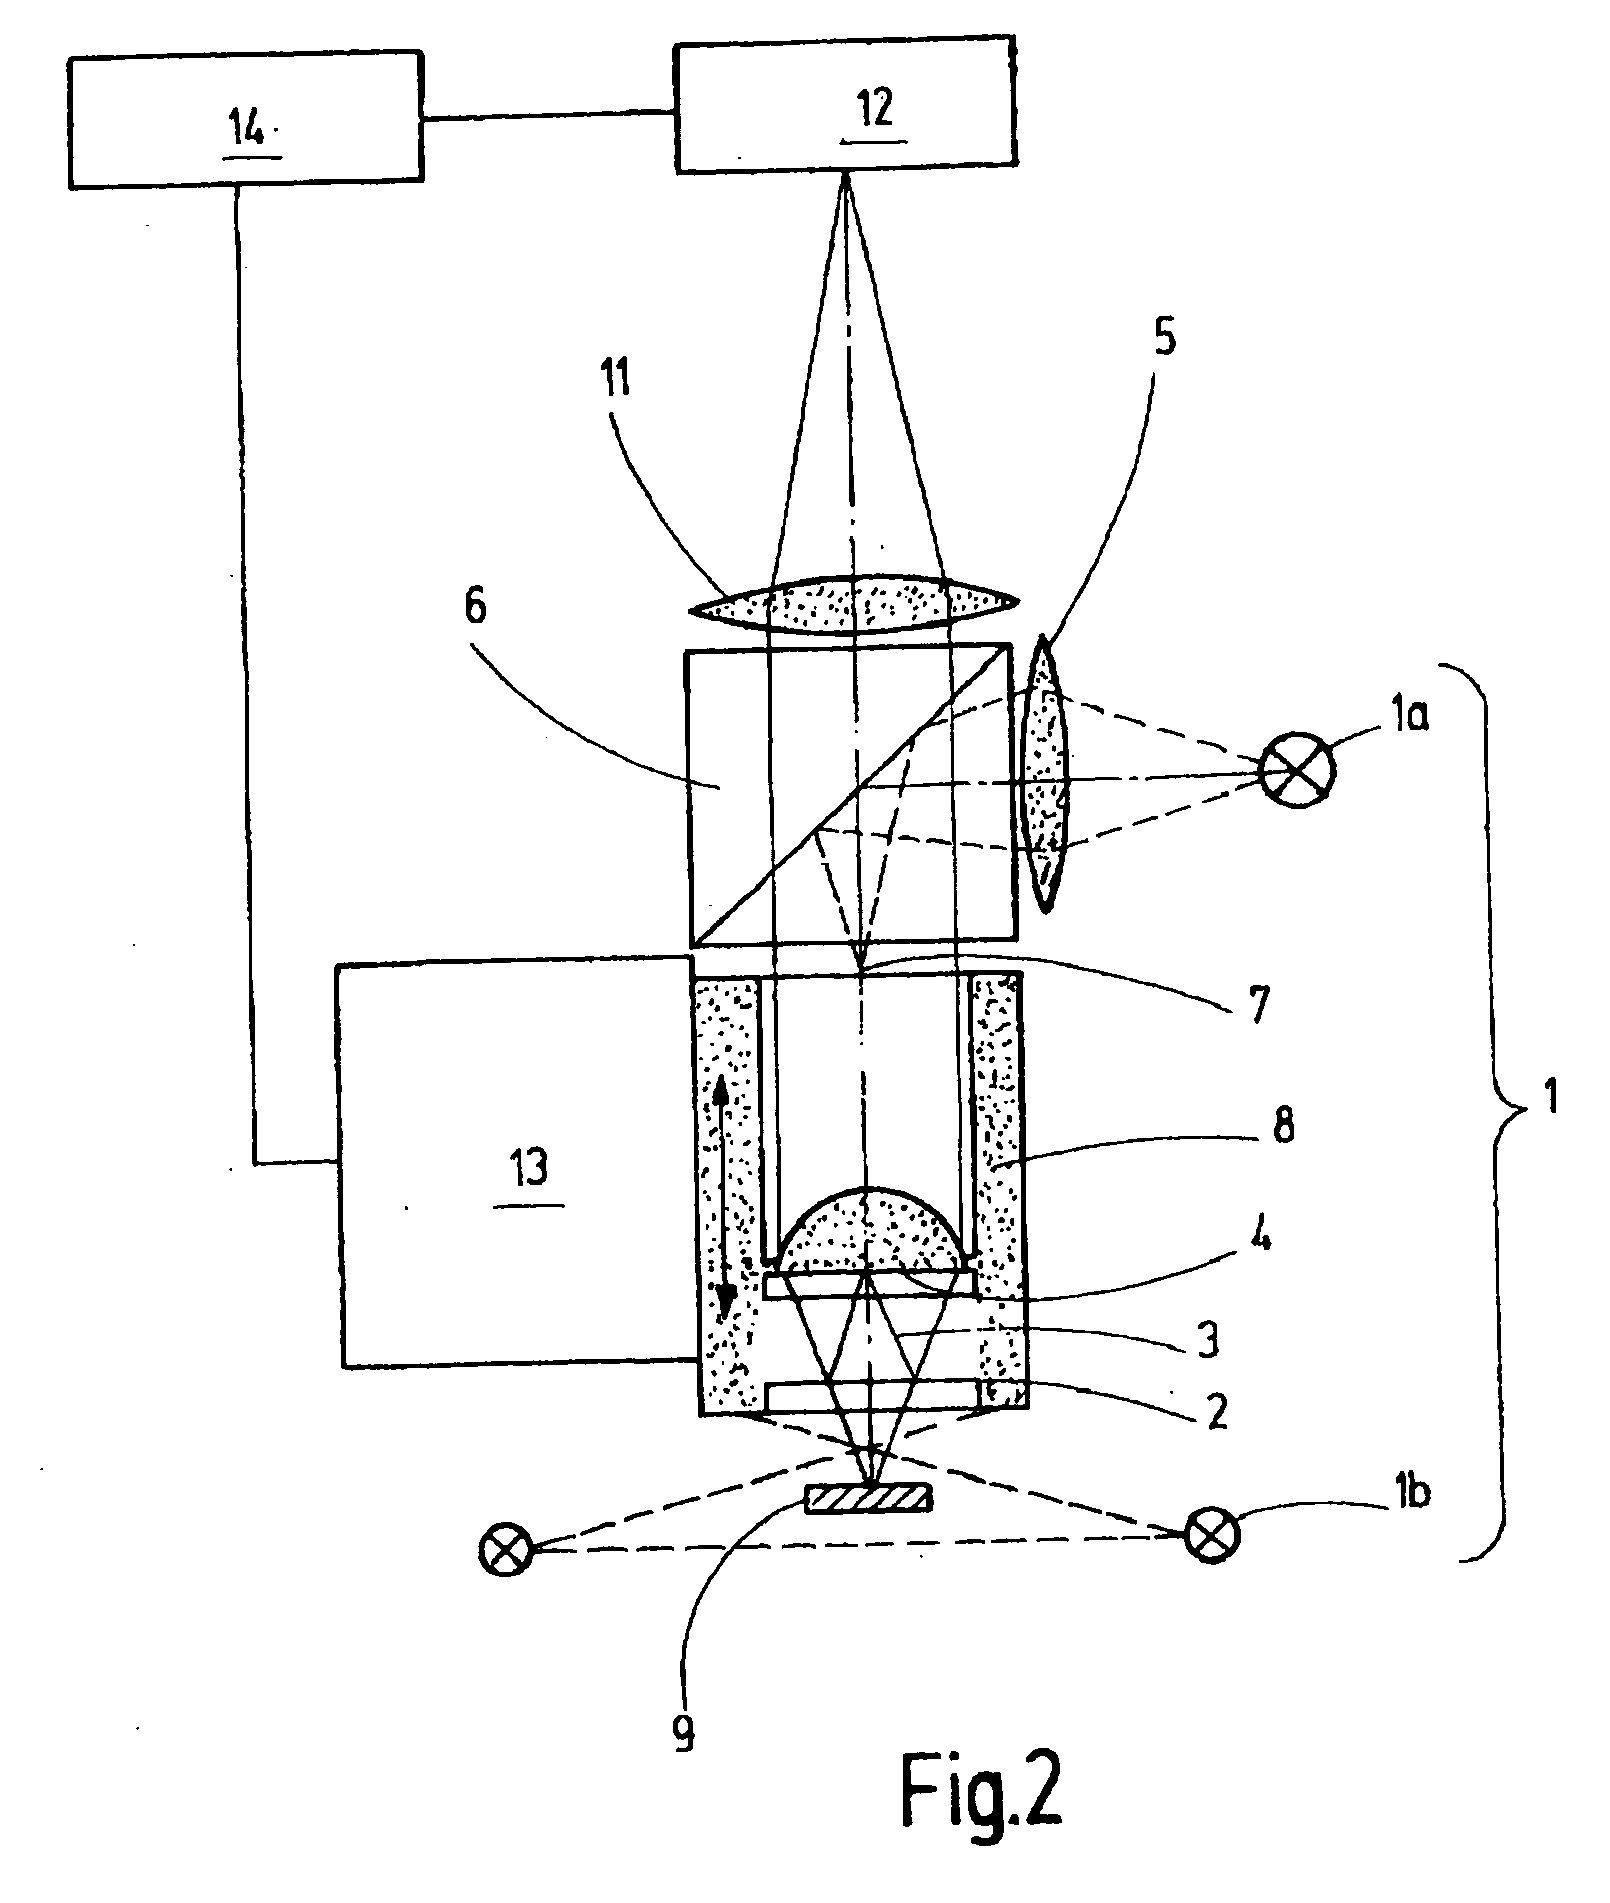 Apparatus and method for a combined interferometric and image based geometric determination, particularly in the microsystem technology